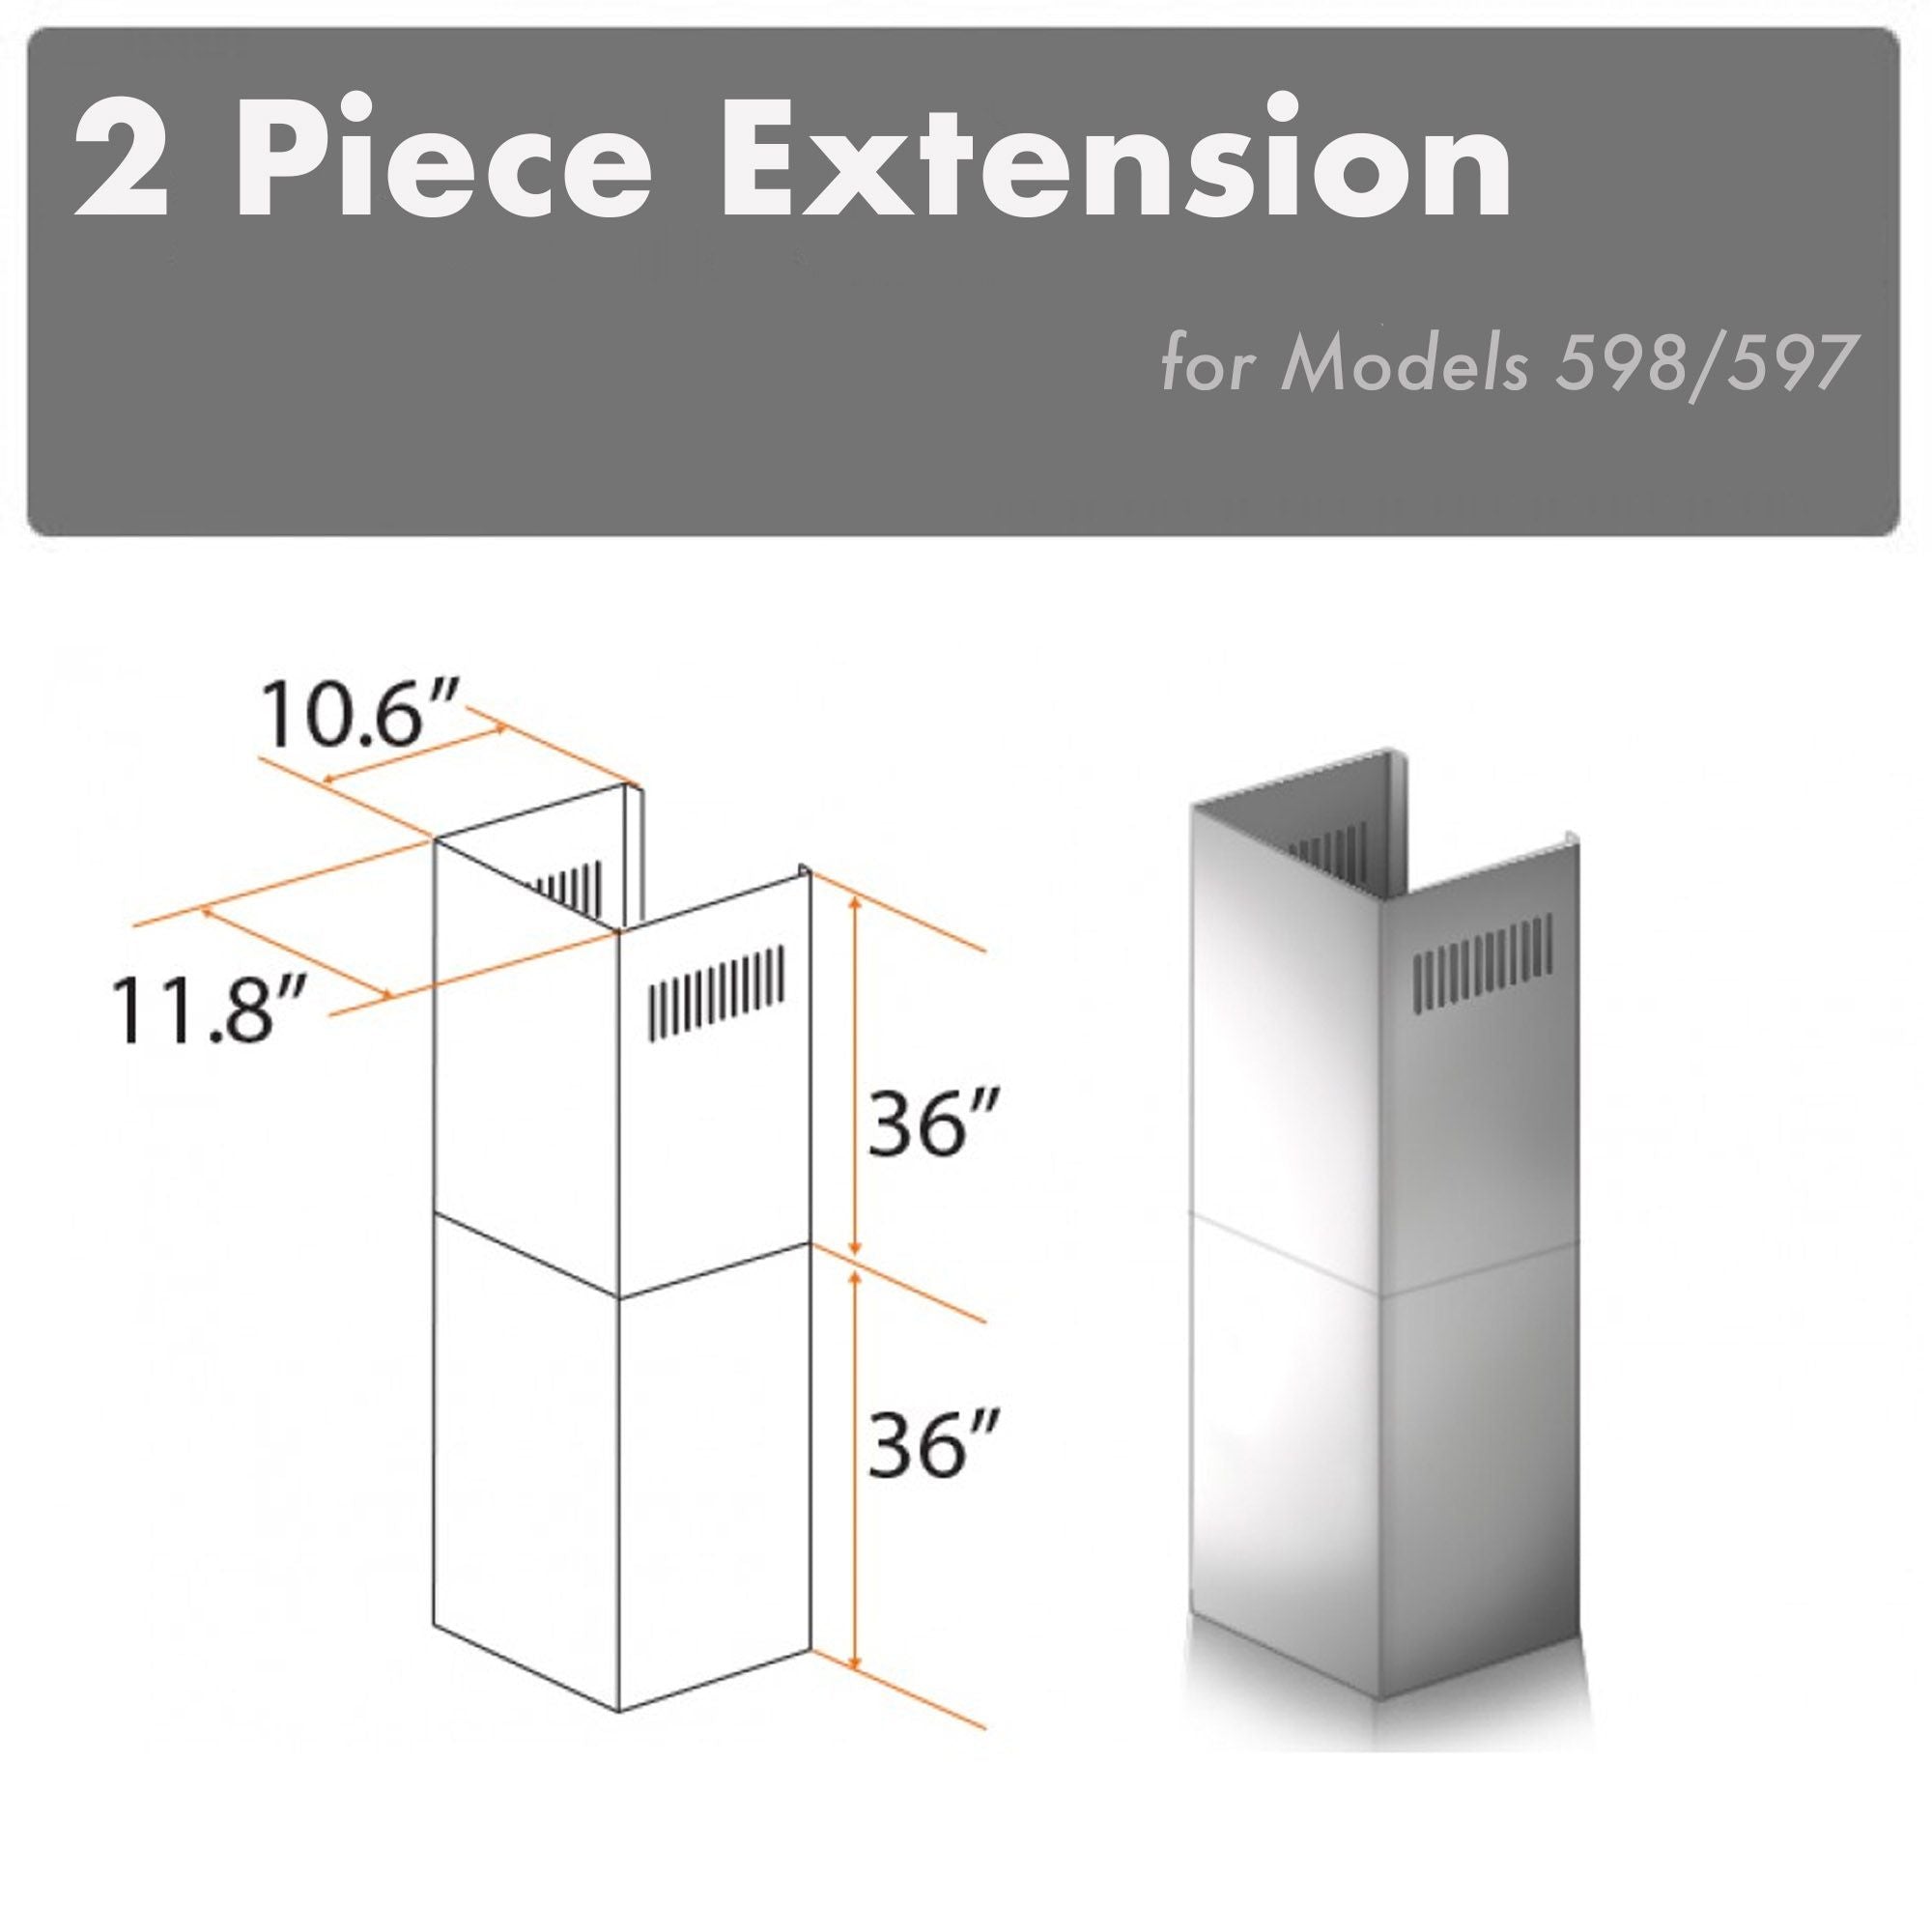 ZLINE 2-36" Chimney Extensions for 10 ft. to 12 ft. Ceilings (2PCEXT-587/597)